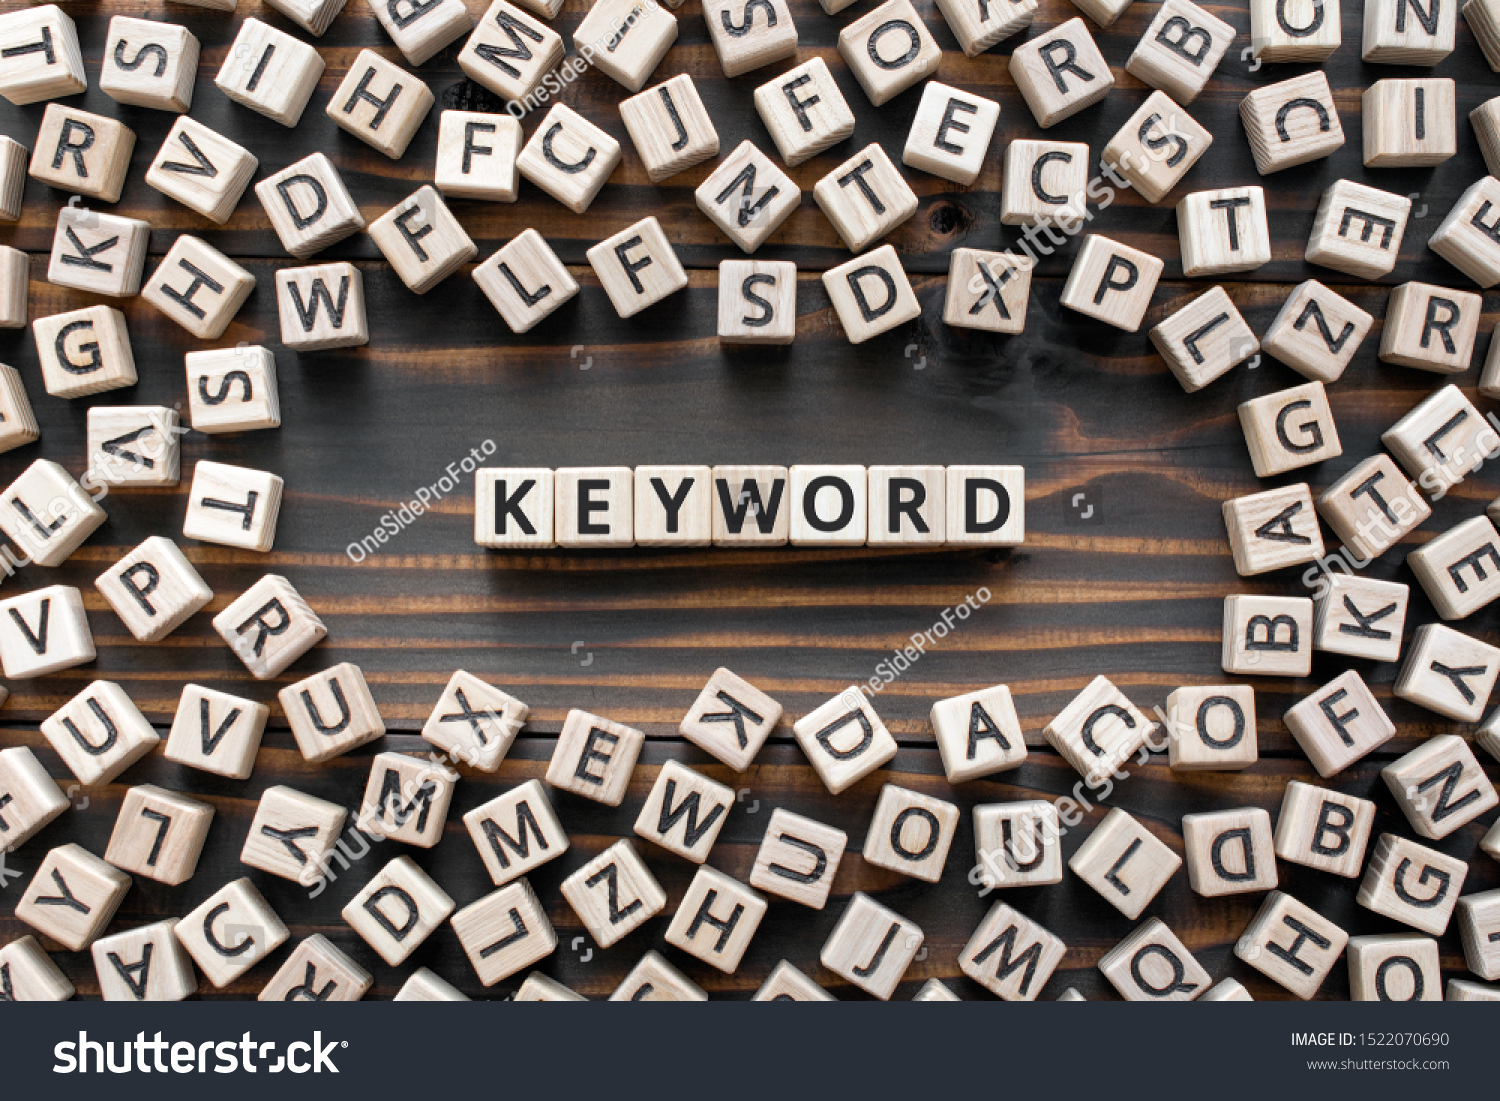 Keyword - word from wooden blocks with letters, search information that contains that word keyword concept, random letters around, top view on wooden background #1522070690